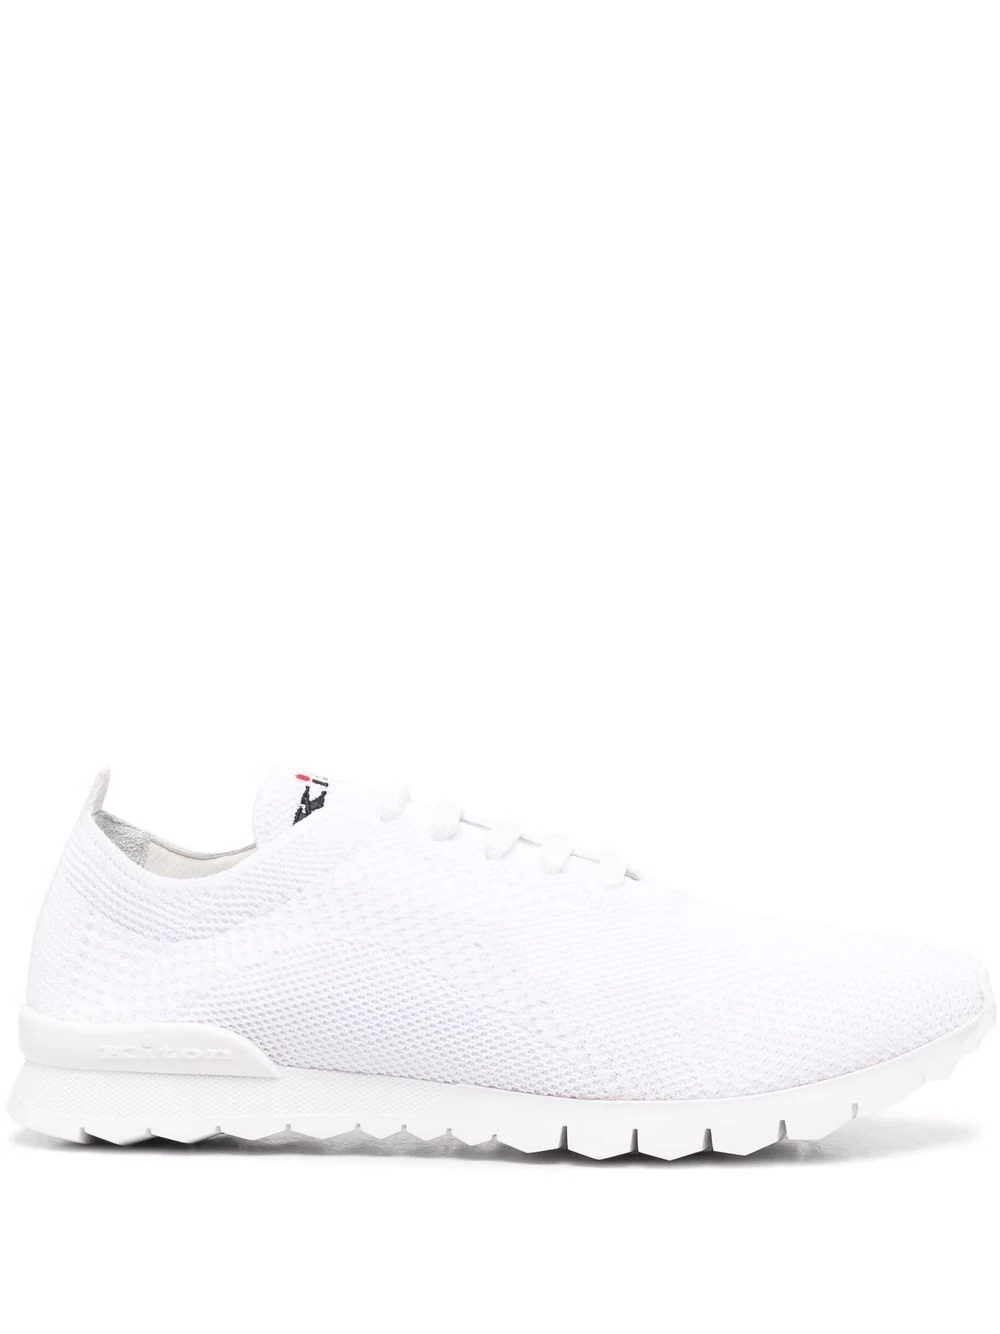 kiton fit sneaker in textured knit